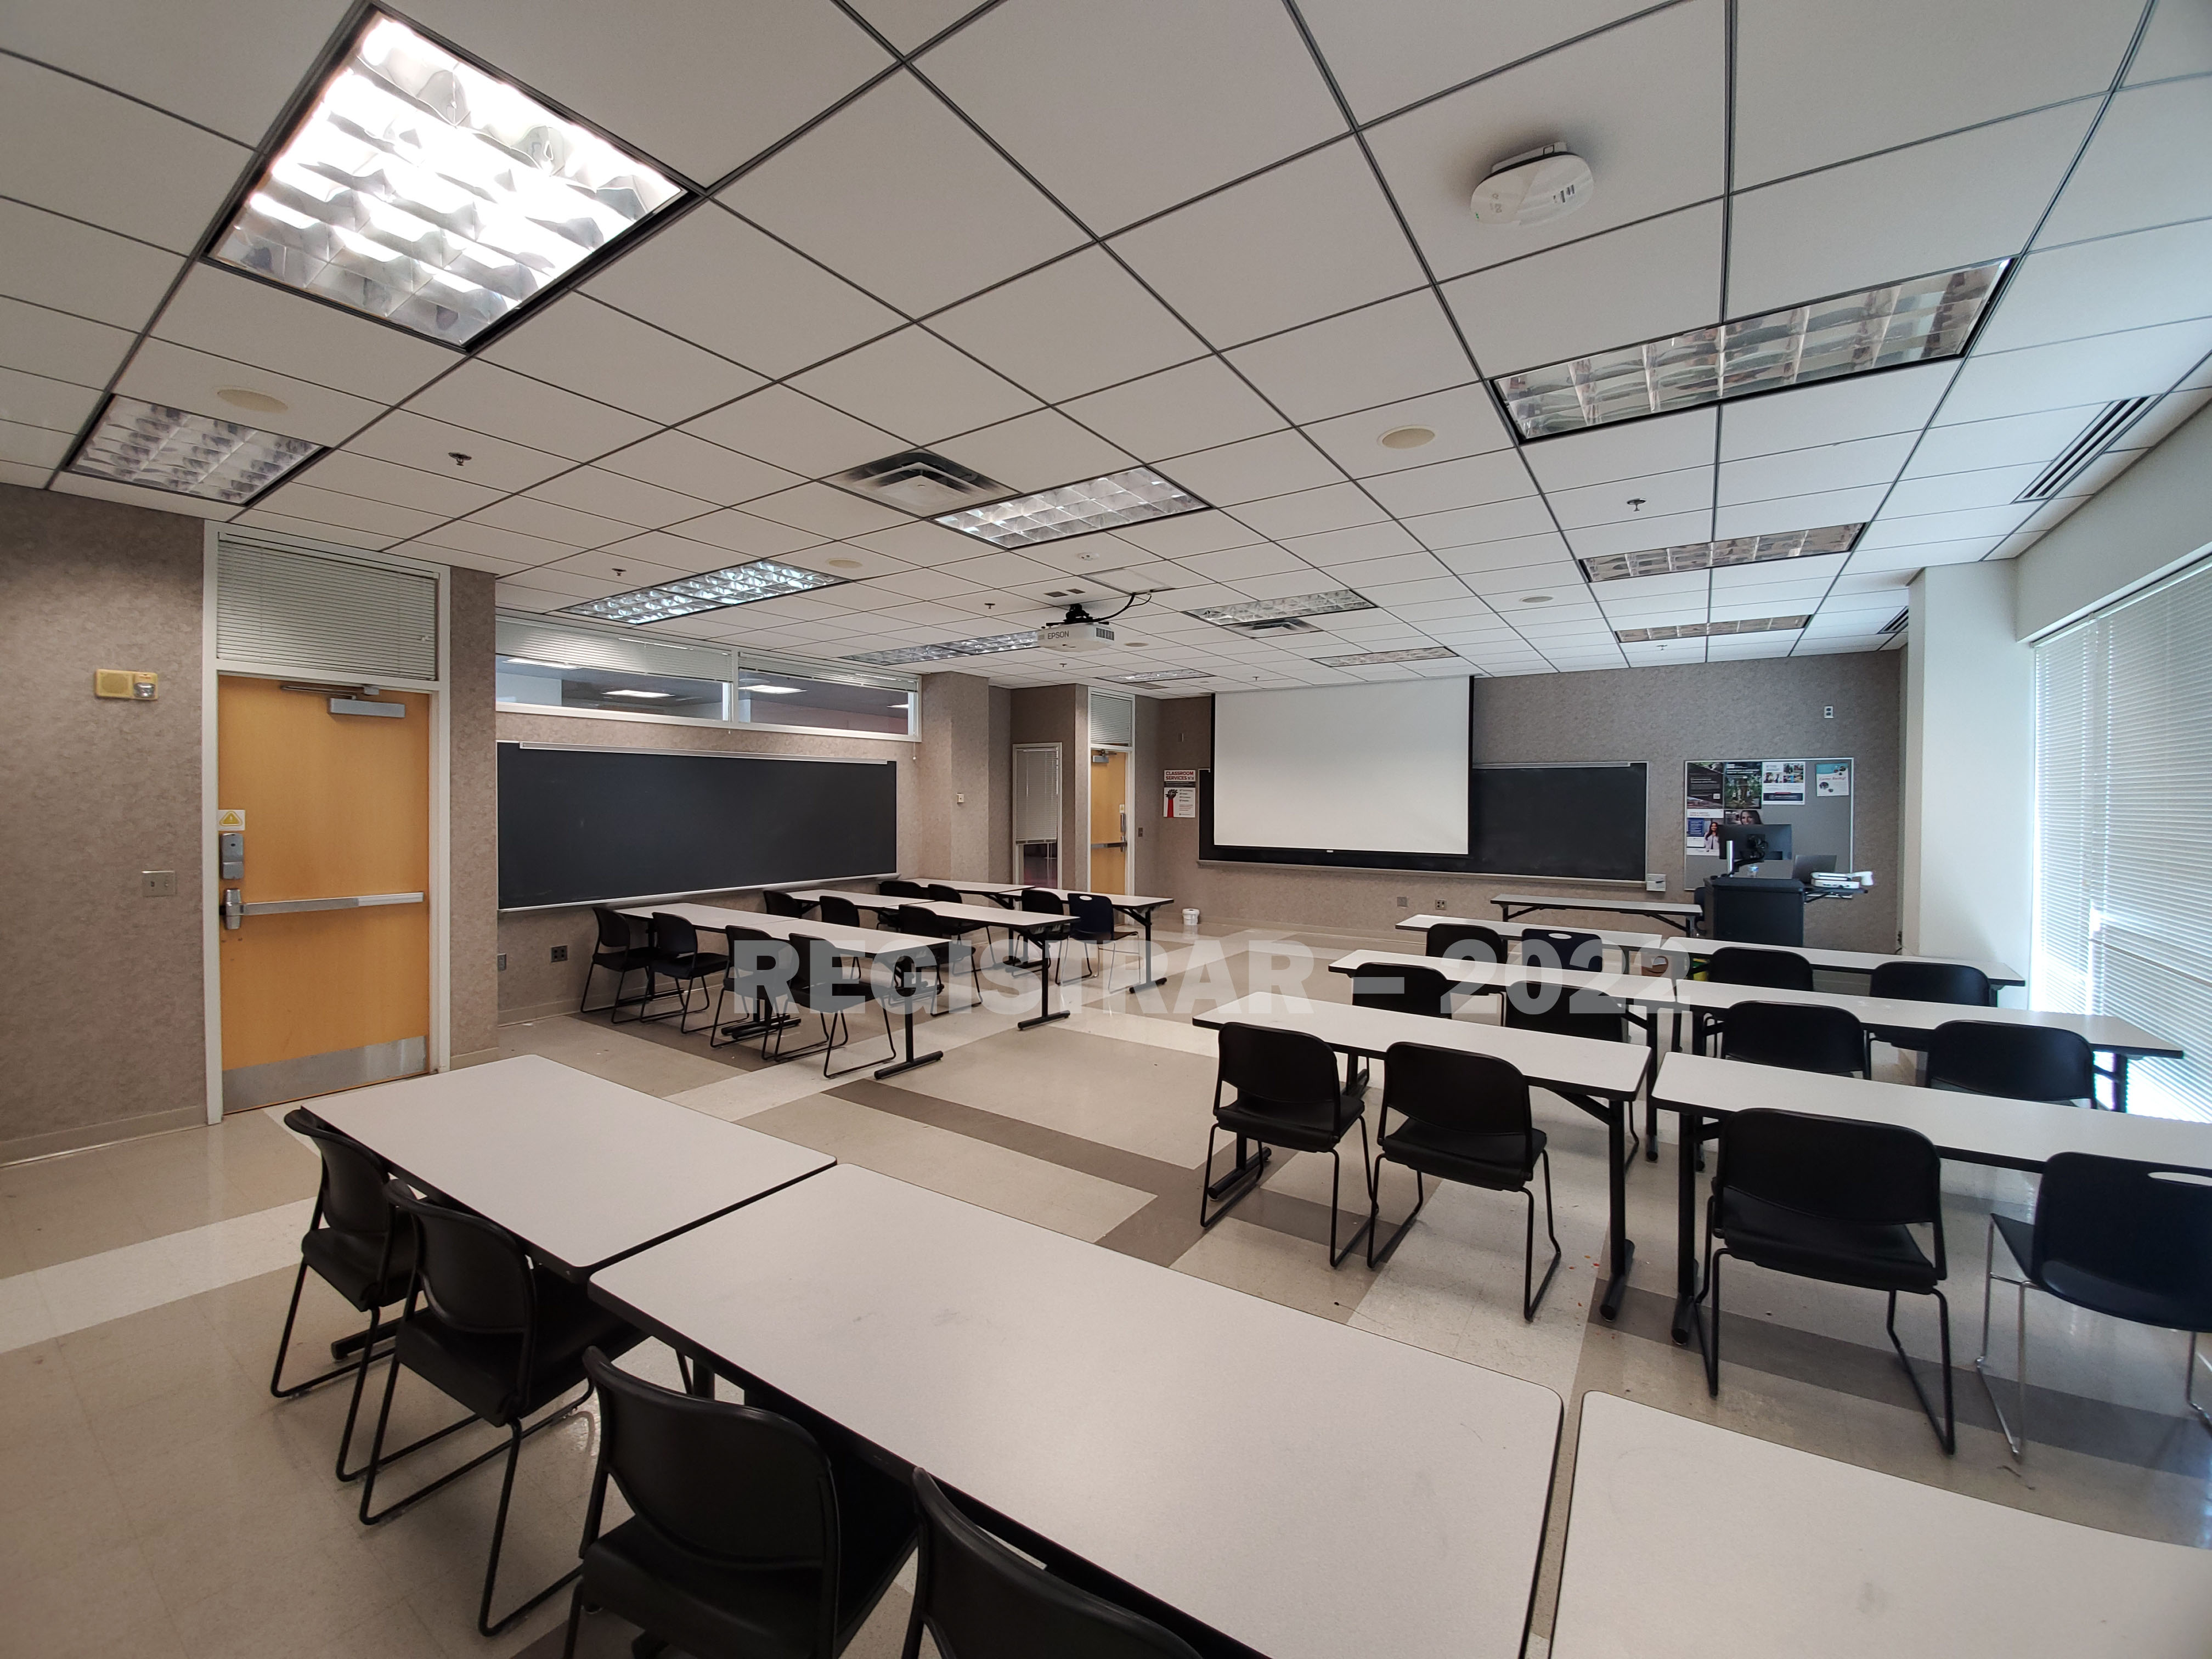 Physical Activity and Education Services Building room 105 ultra wide angle view from the back of the room with projector screen down